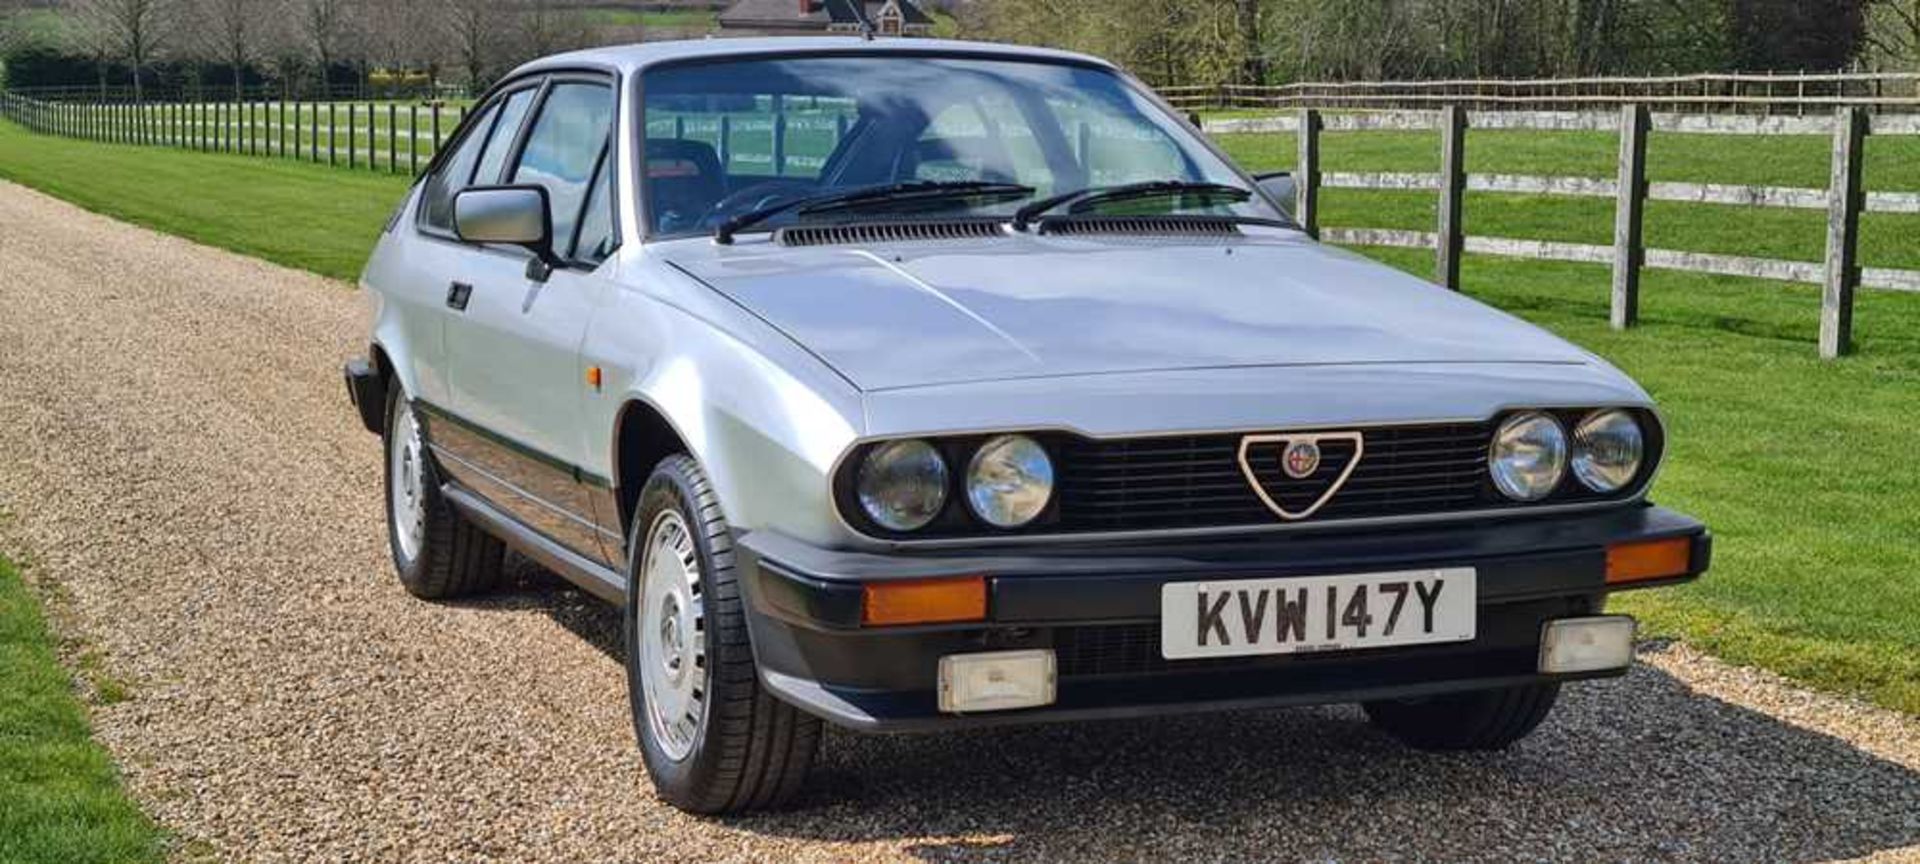 1983 Alfa Romeo GTV 2.0 litre Single family ownership and 48,000 miles from new - Image 15 of 51